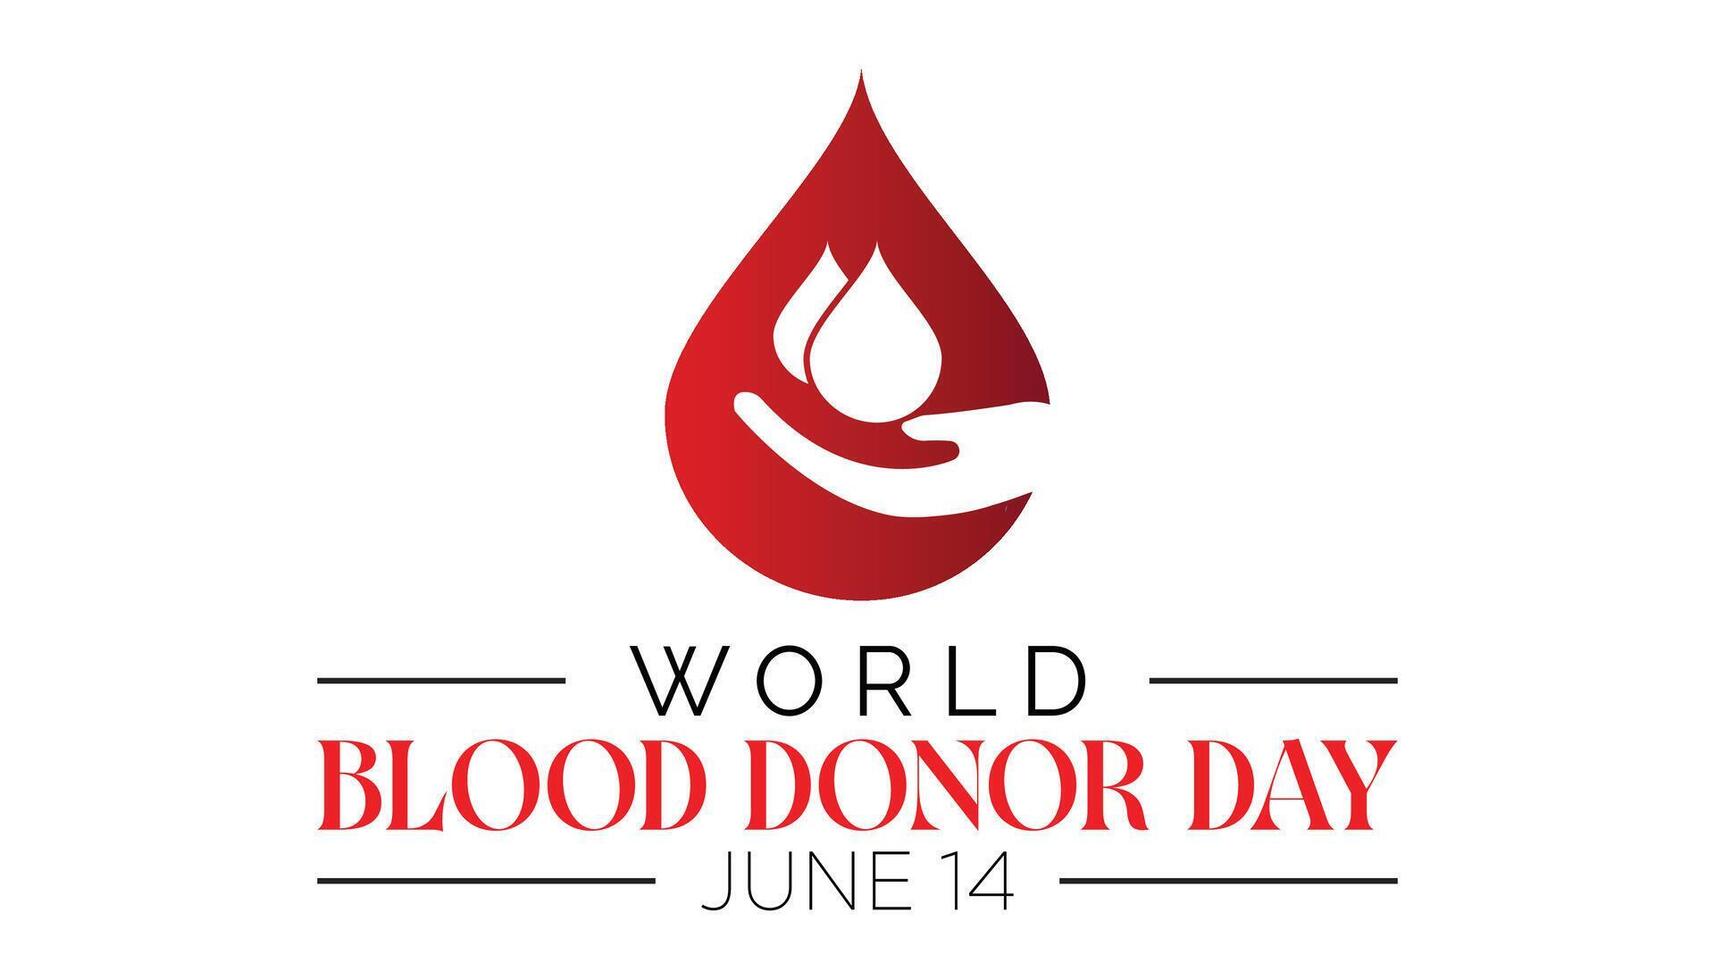 World Blood Donor Day observed every year in June. Template for background, banner, card, poster with text inscription. vector